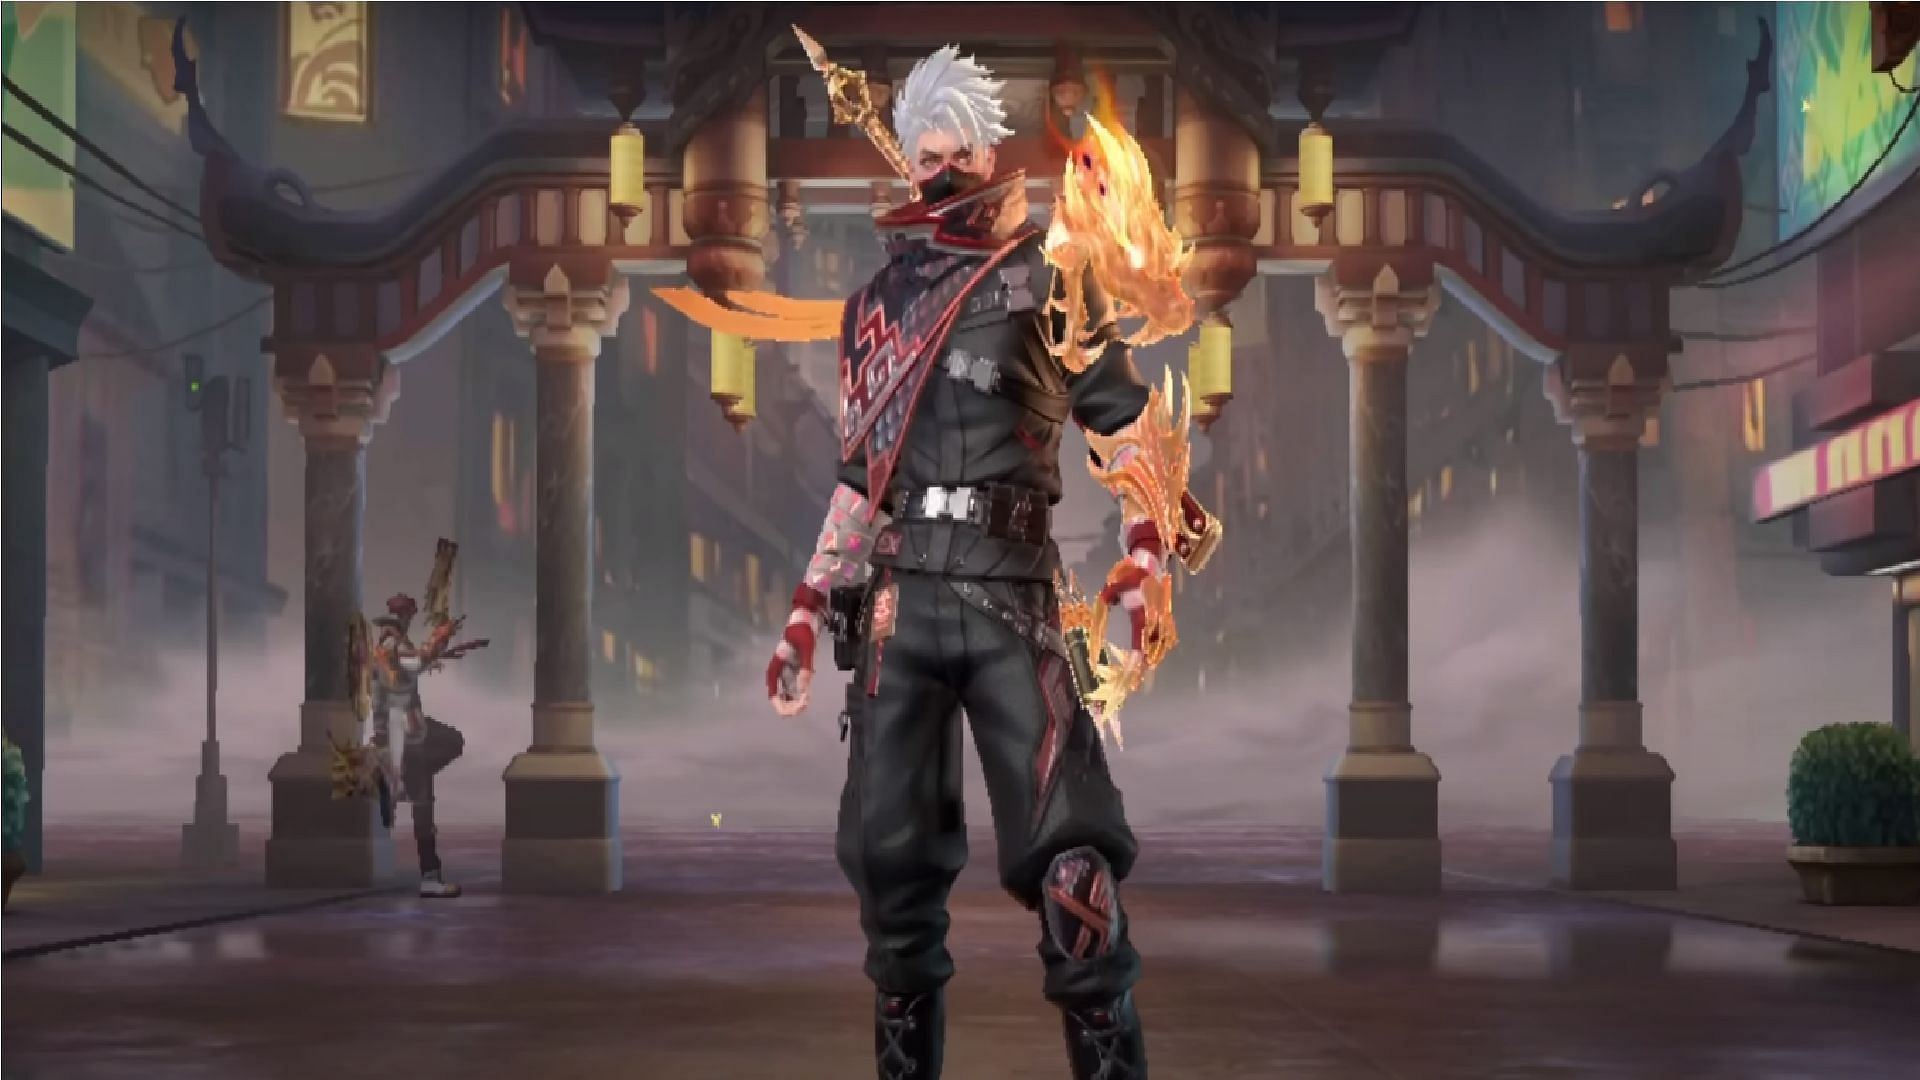 Hayabusa received one of the new Exorcist skins in Mobile Legends Bang Bang (Image via Moonton Games)